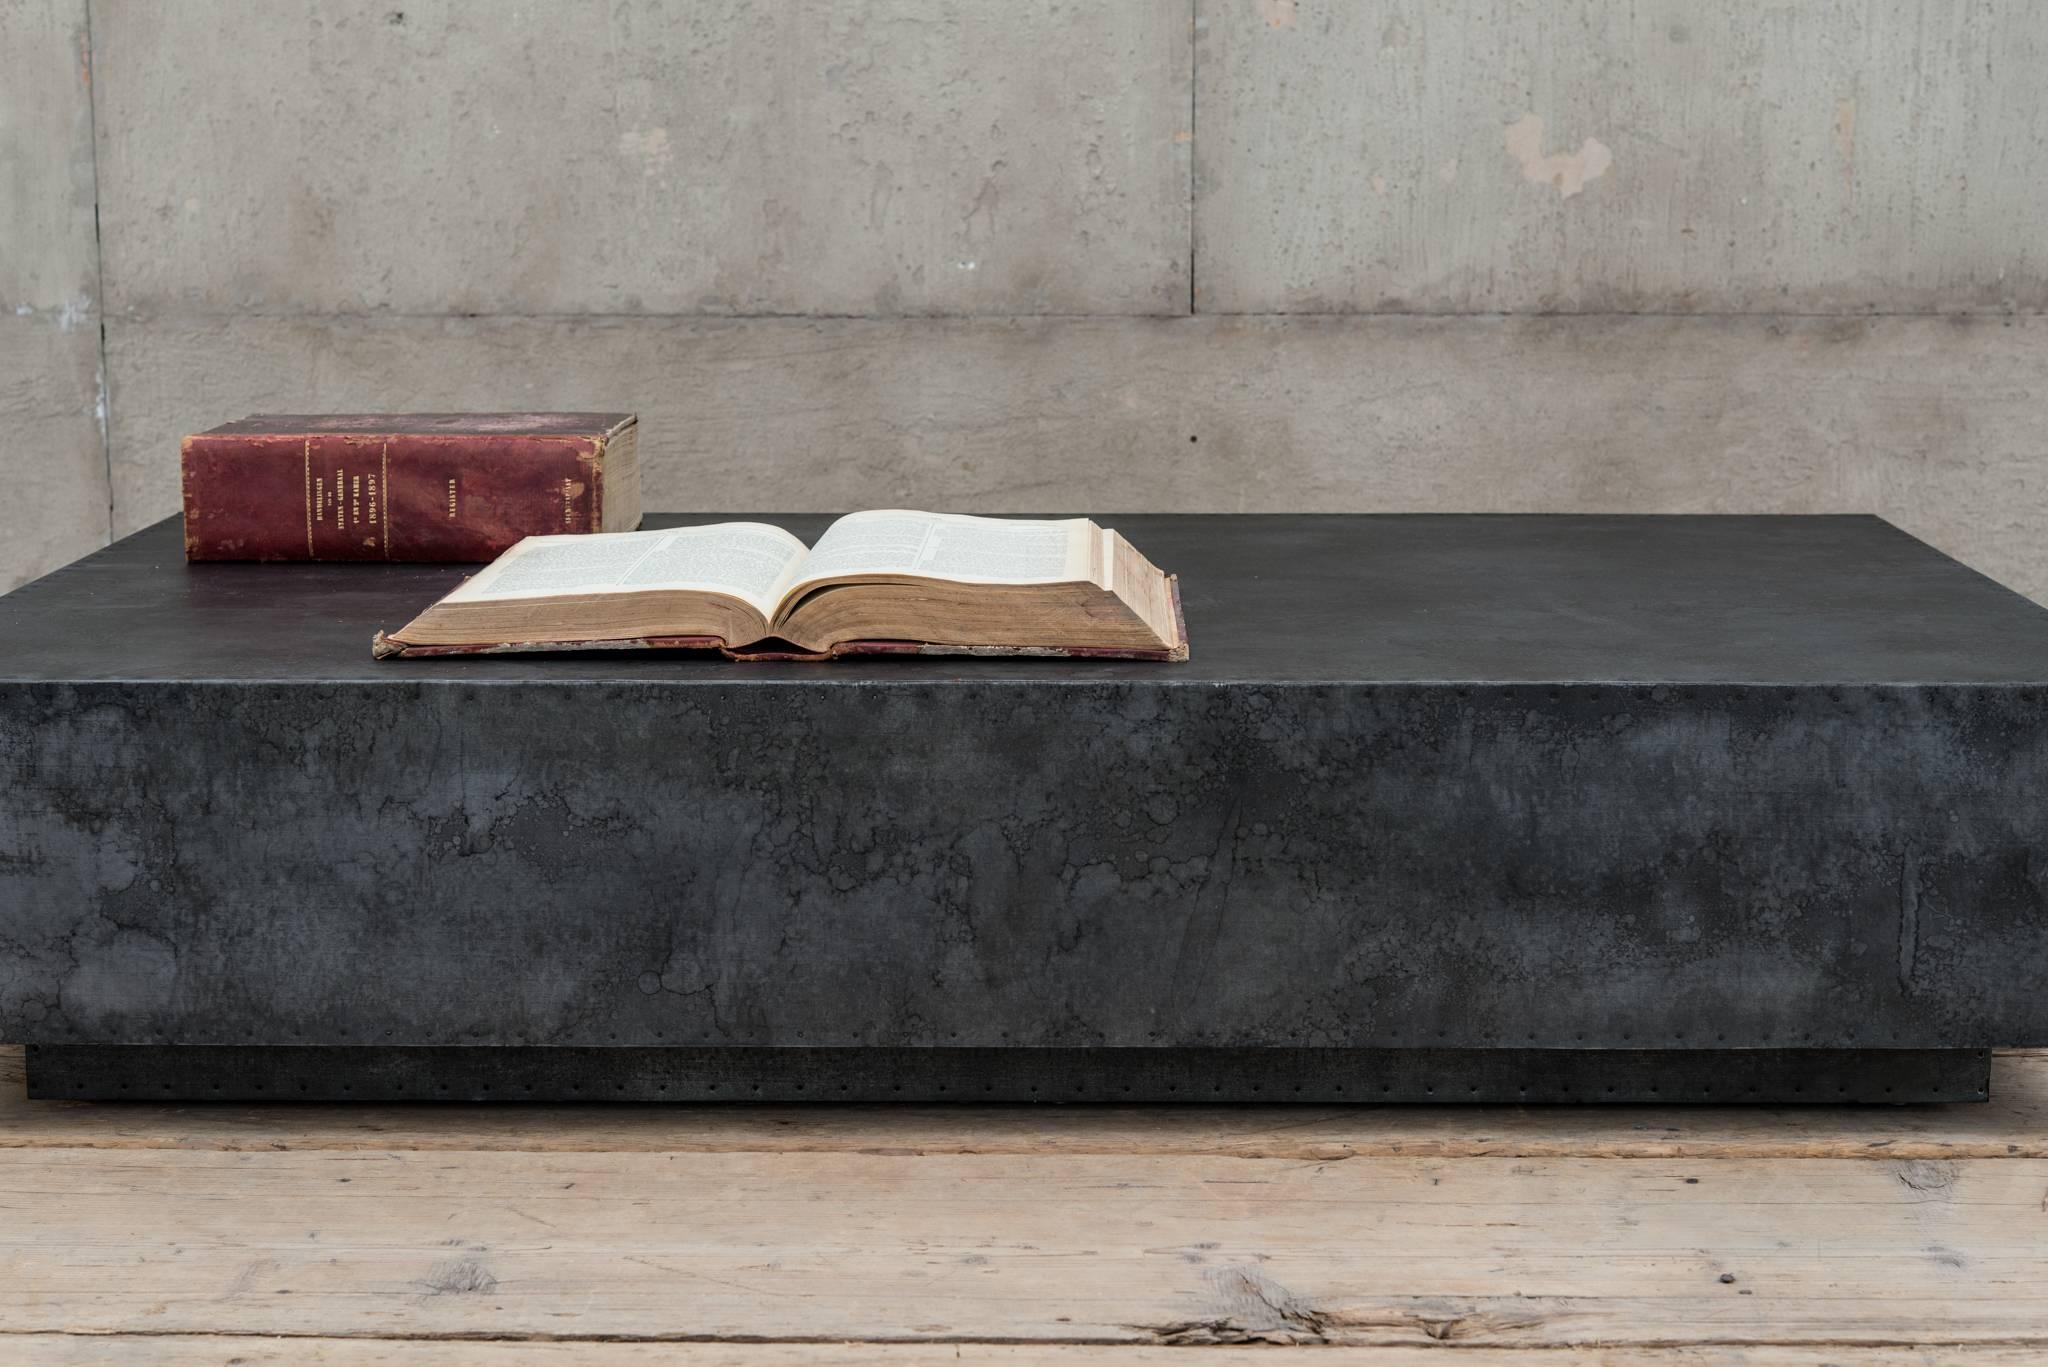 Zinc covered coffee table on plinth.
A sleek slab of zinc floats over a recessed plinth. Antiqued patina and spit-tack detailing add age and character to this modernist piece.